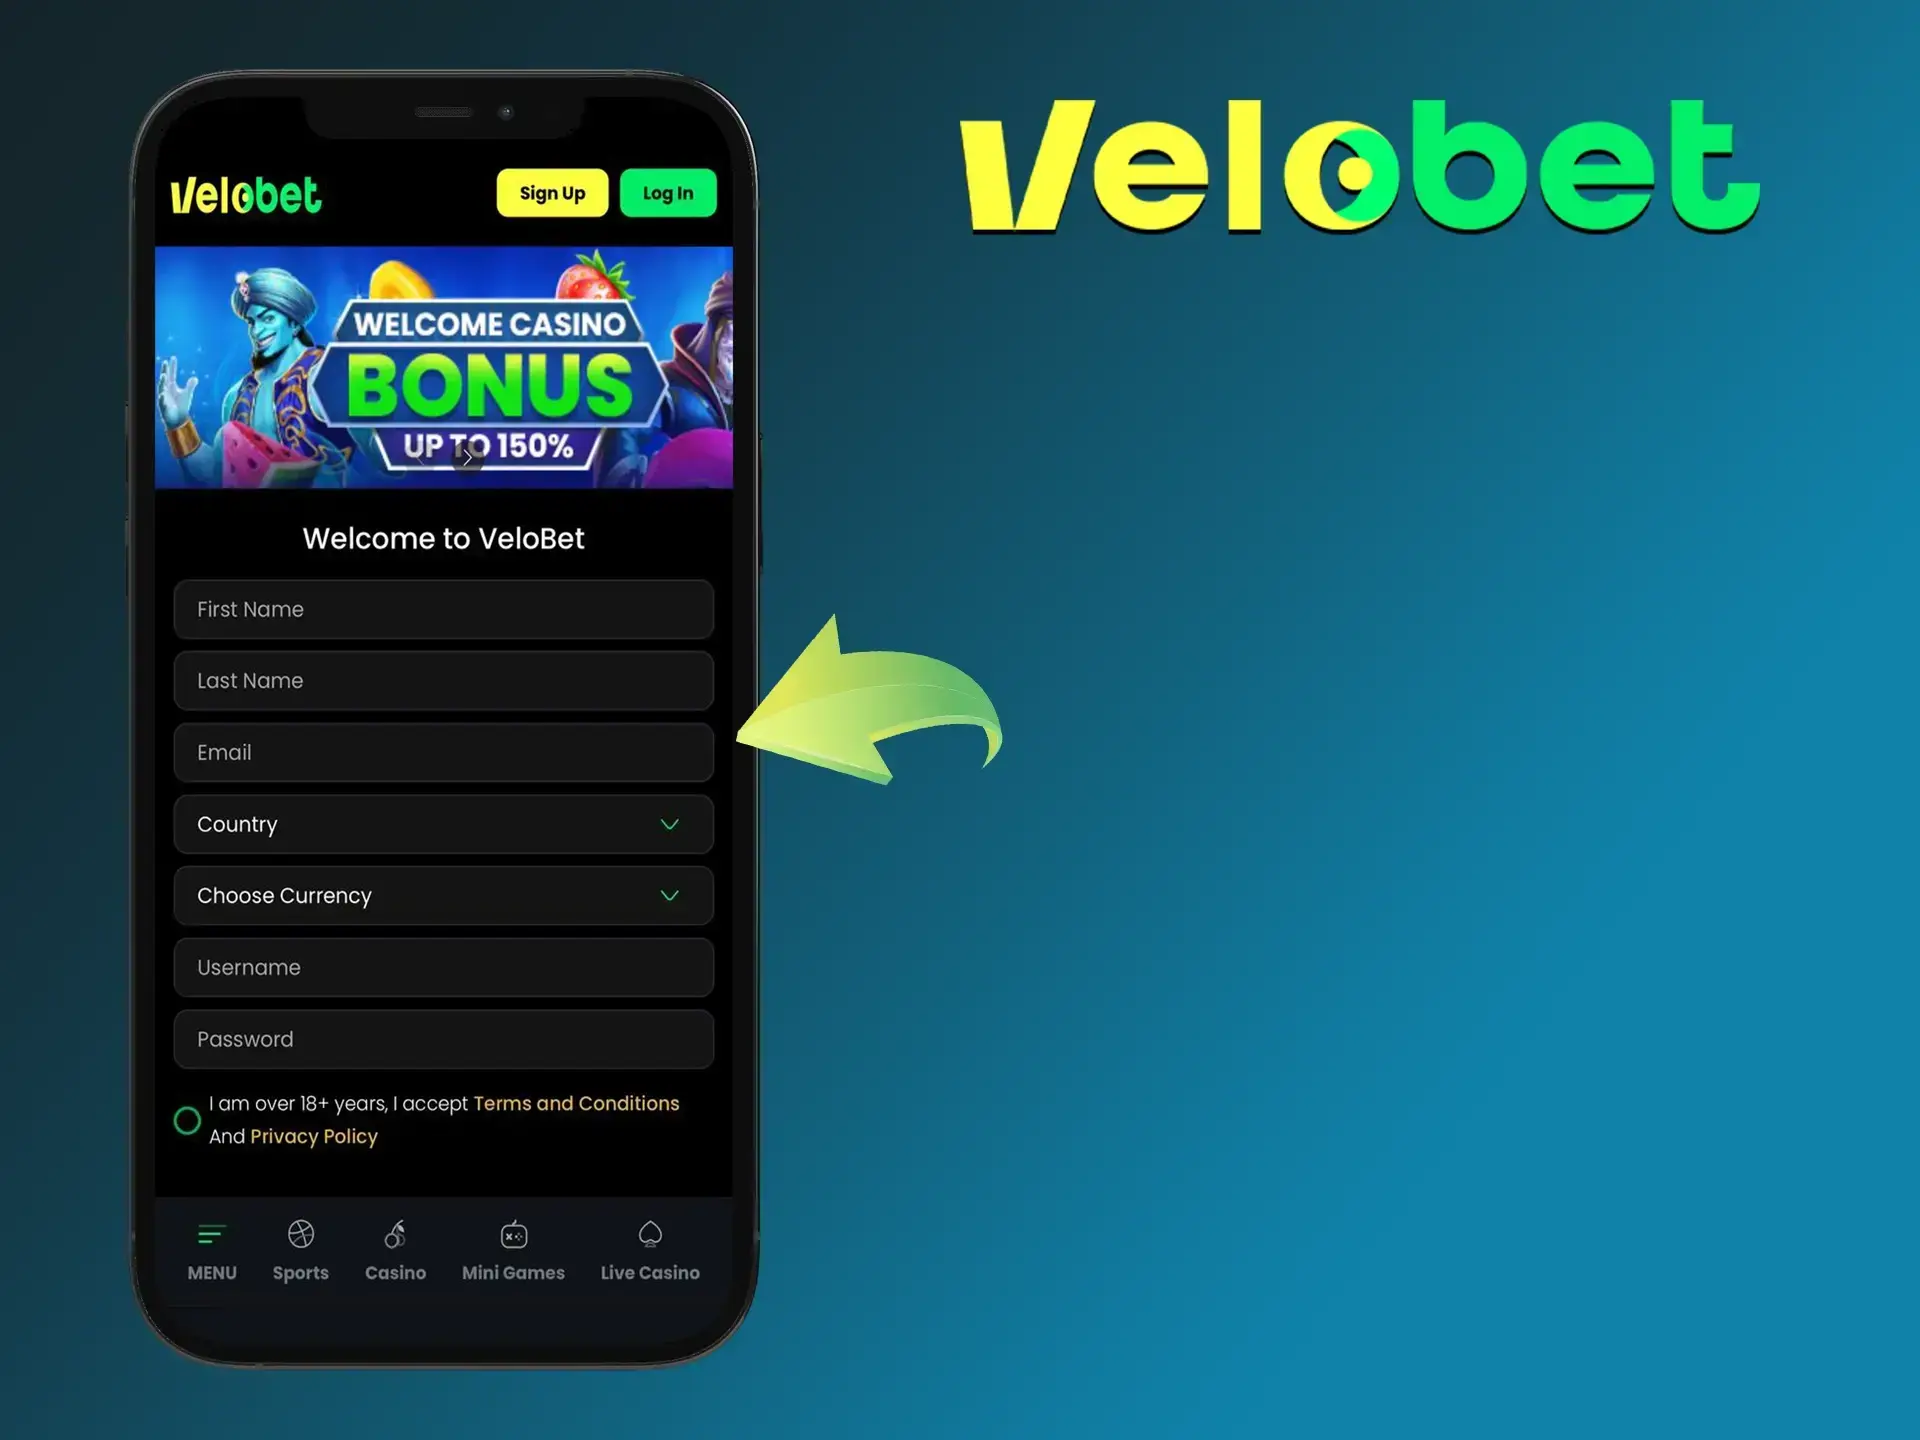 Carefully fill out the form to register at Velobet Casino.